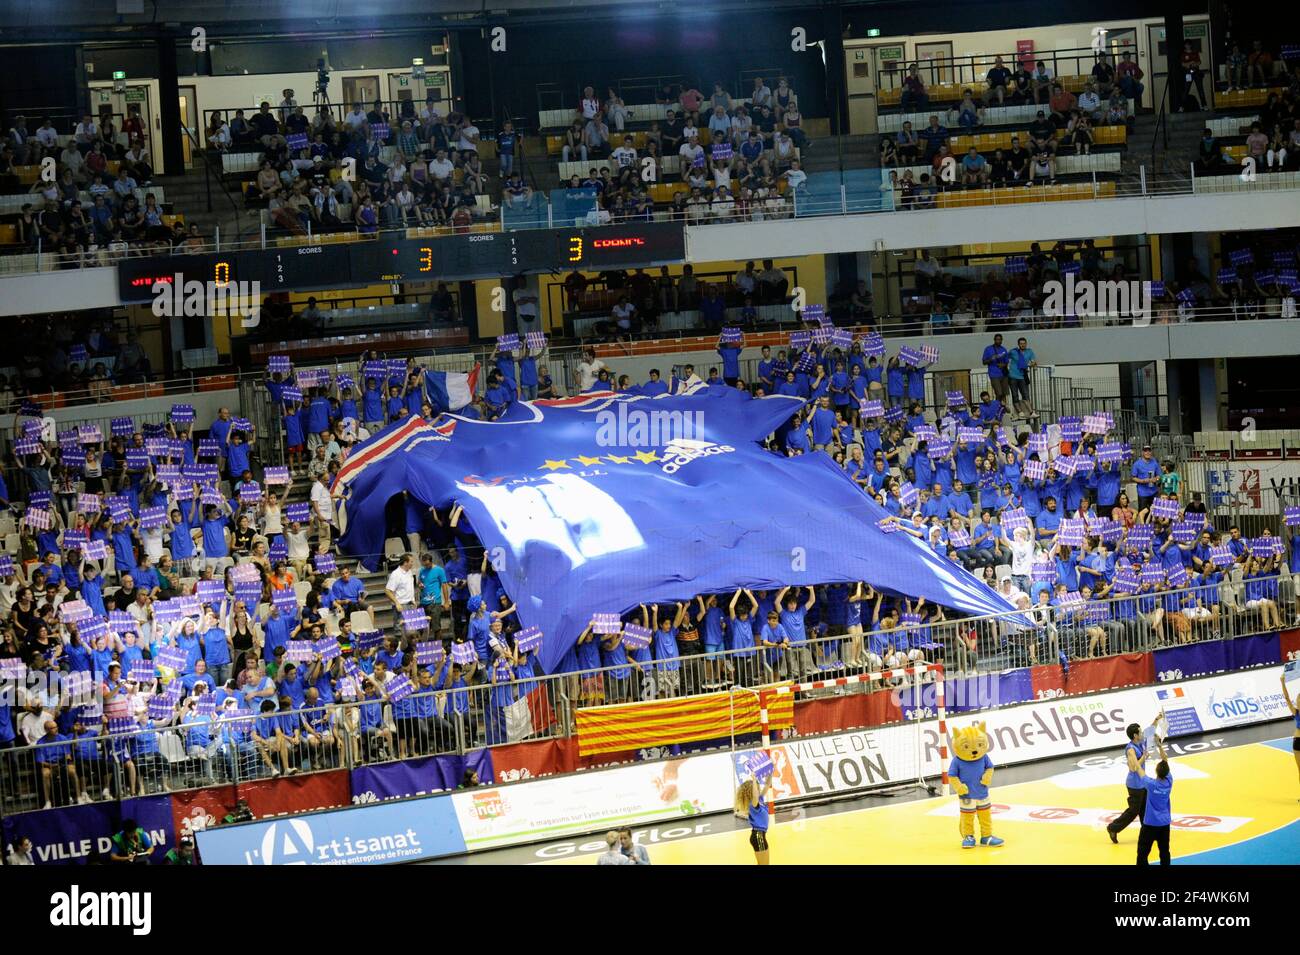 HANDBALL -WOMEN - OLYMPIC GAMES QUALIFICATIONS - LYON (FRA) - FRANCE V JAPON - 26/05/2012 - PHOTO JEAN FRANCOIS MOLLIERE / DPPI -FRENCH FANS Stock Photo